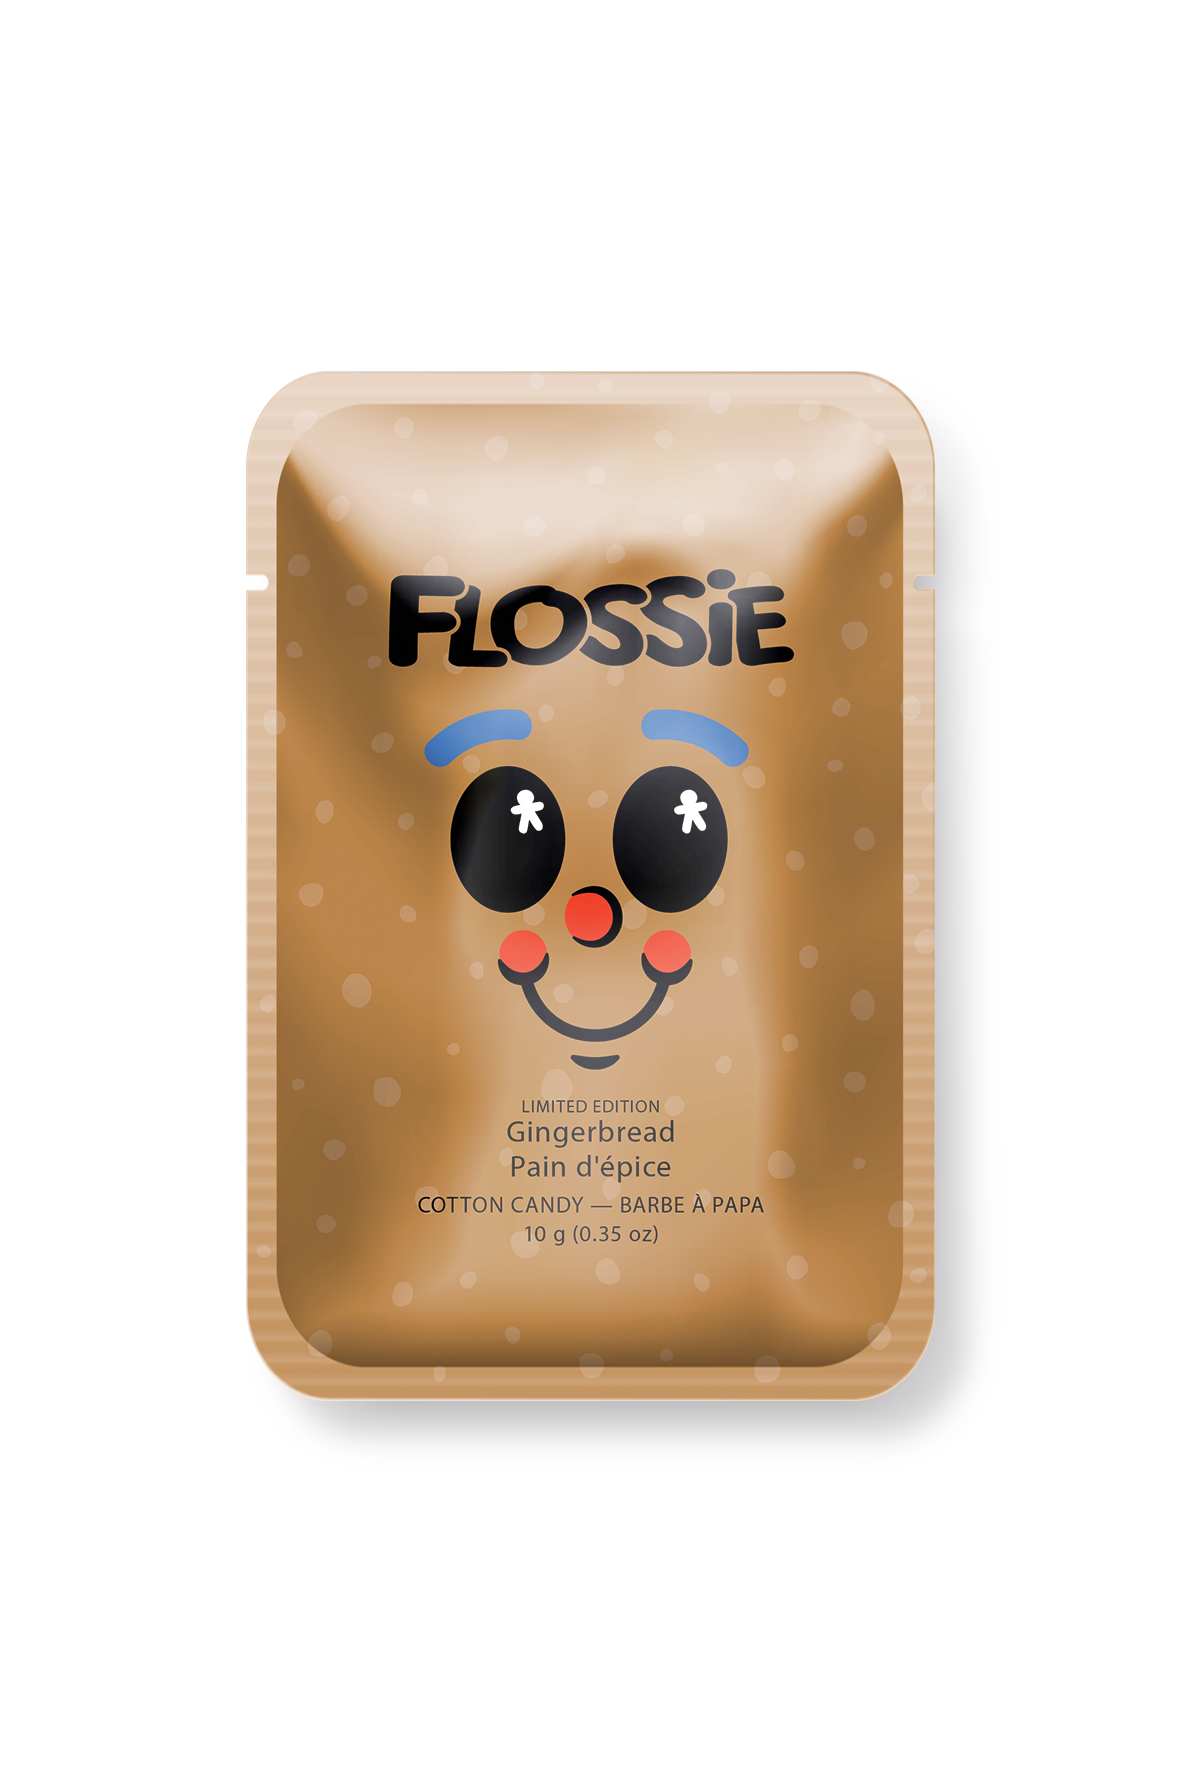 Flossie - Gingerbread Cotton Candy